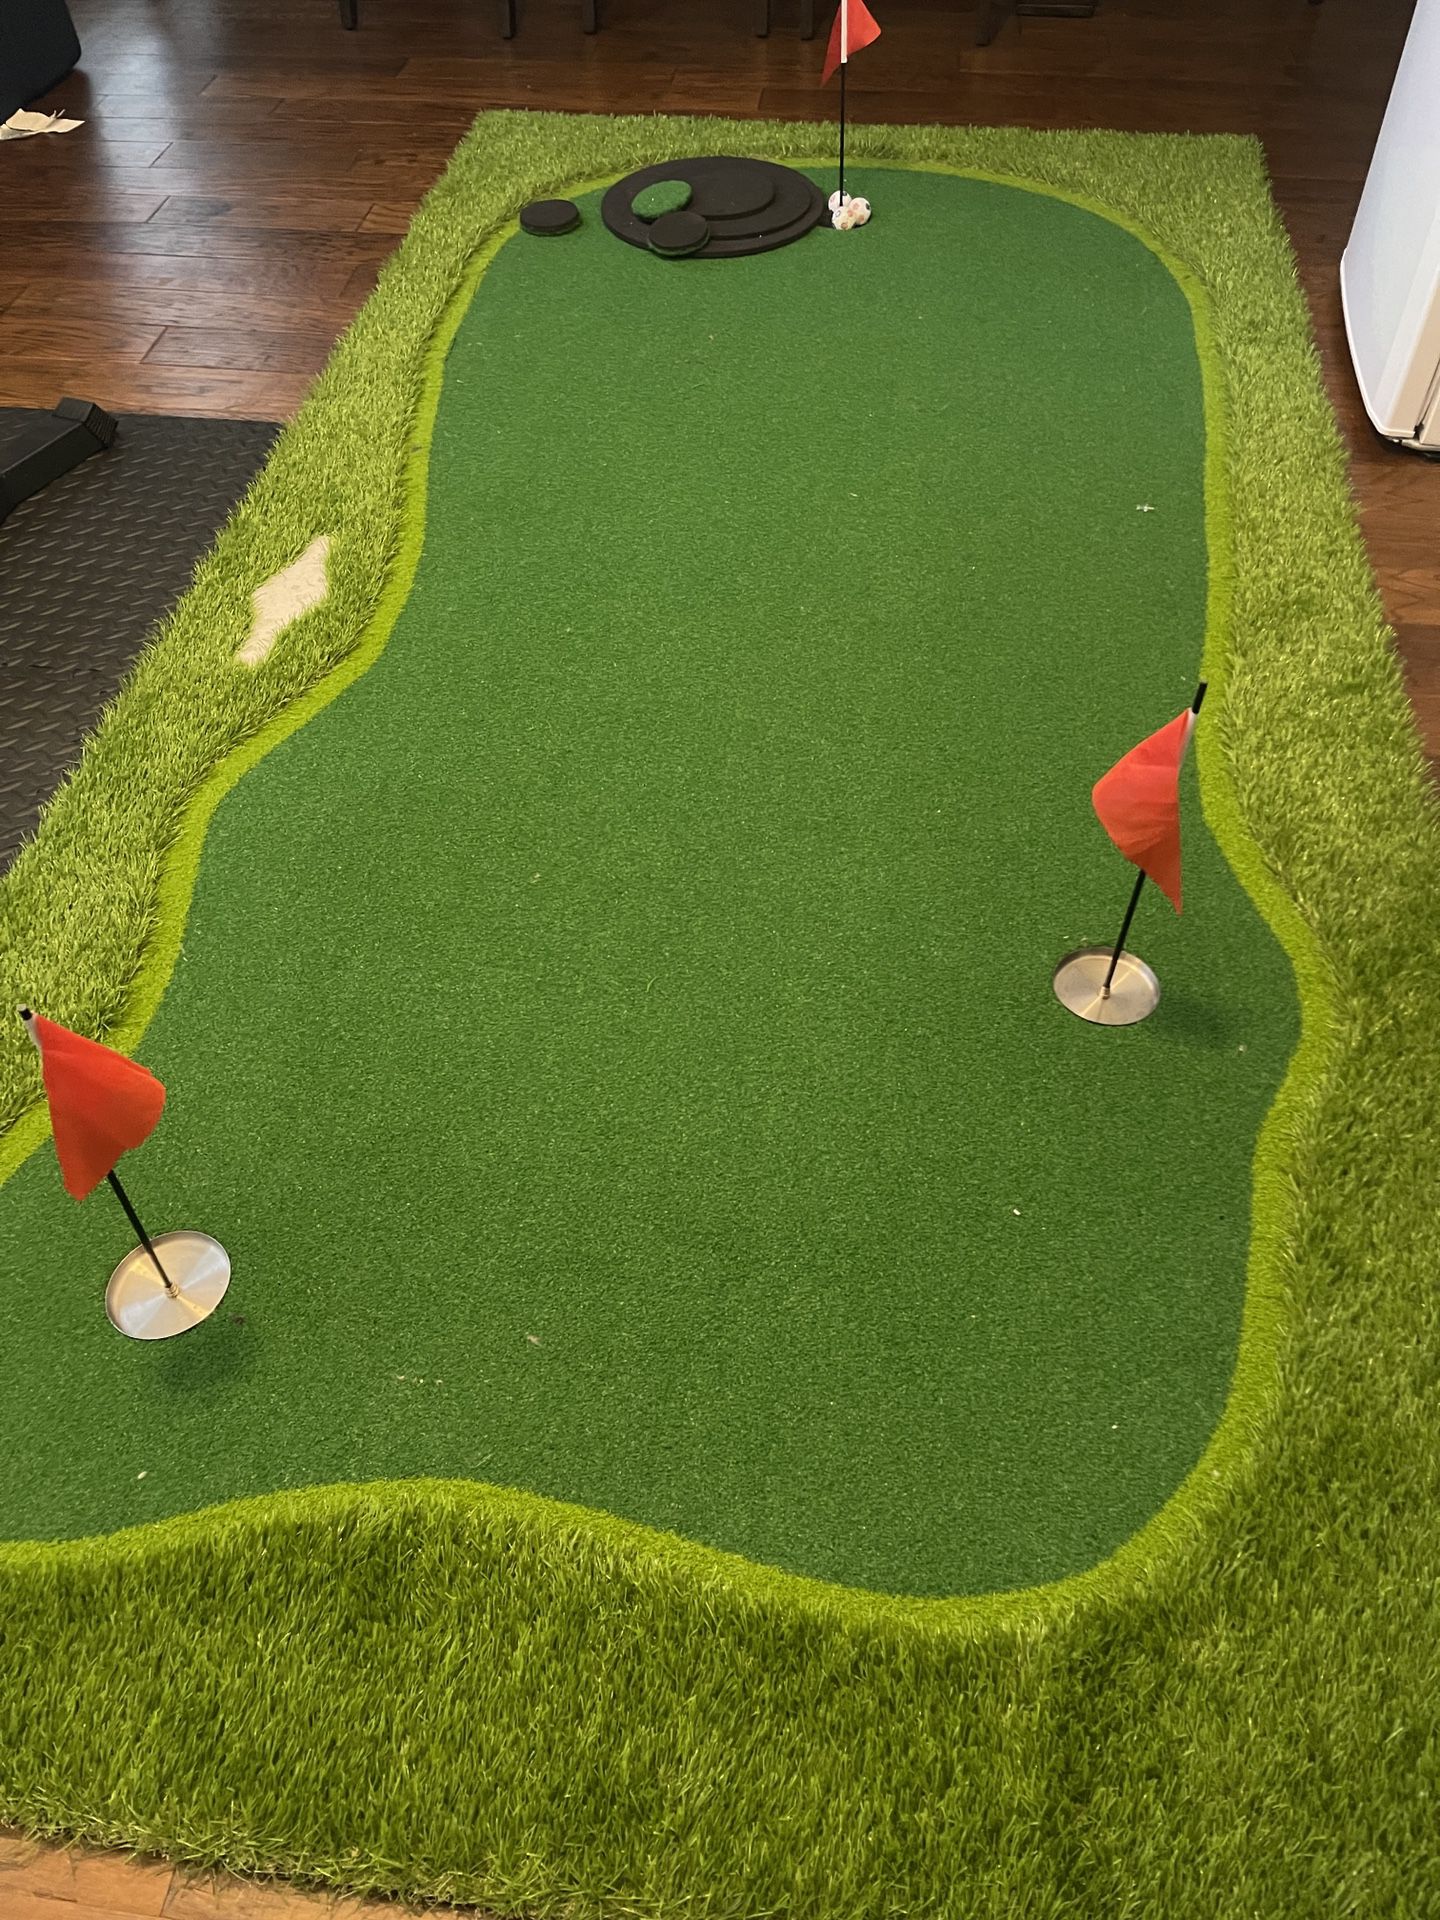 Golf Putting Green, Practice Putting Green Mat, Large Professional Golfing Training Mat for Indoor/Outdoor